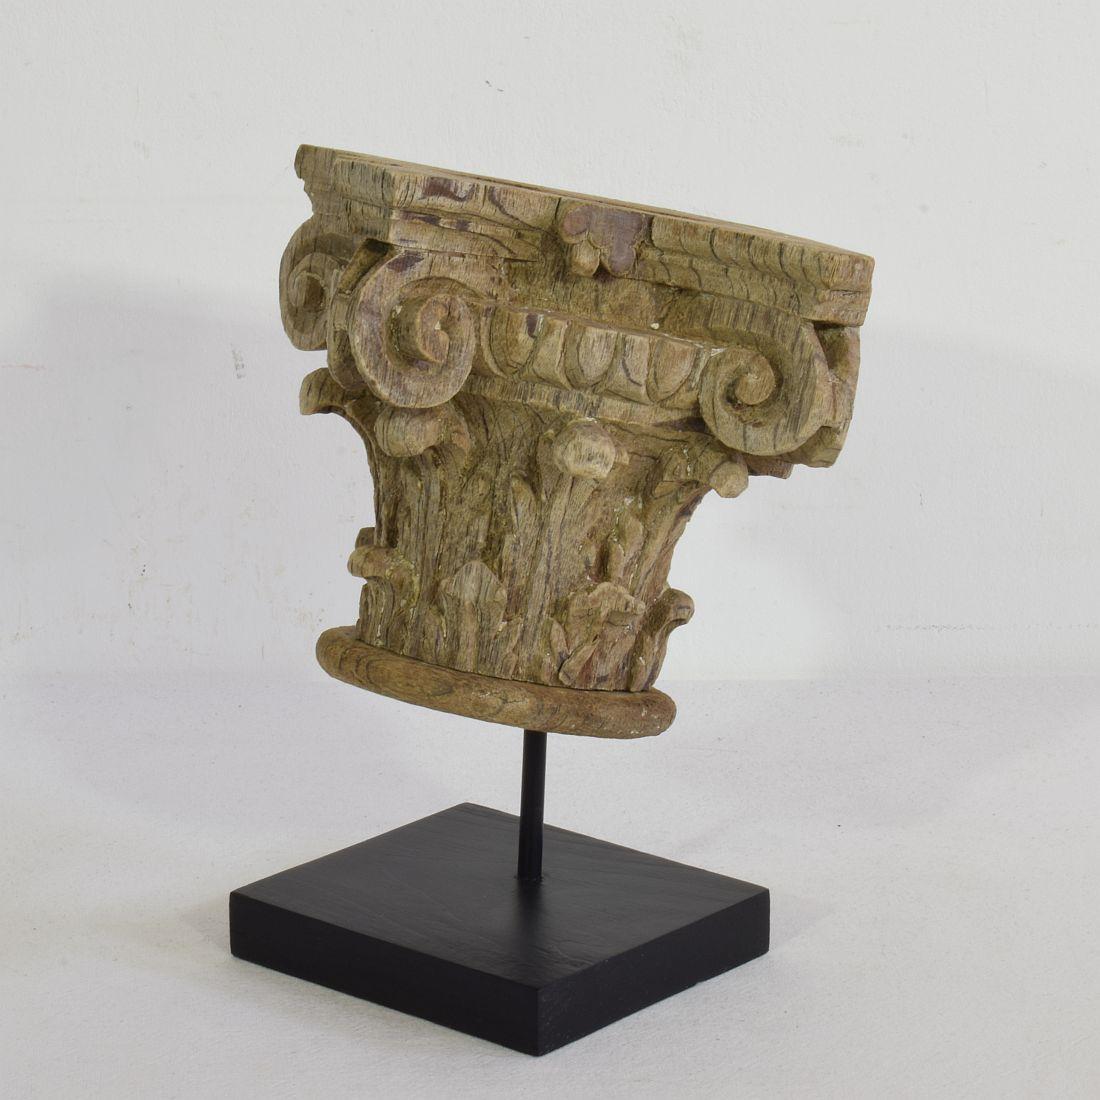 Beautiful weathered hand carved oak Capital, France 17/18th century. Weathered
Measurement includes the wooden base.